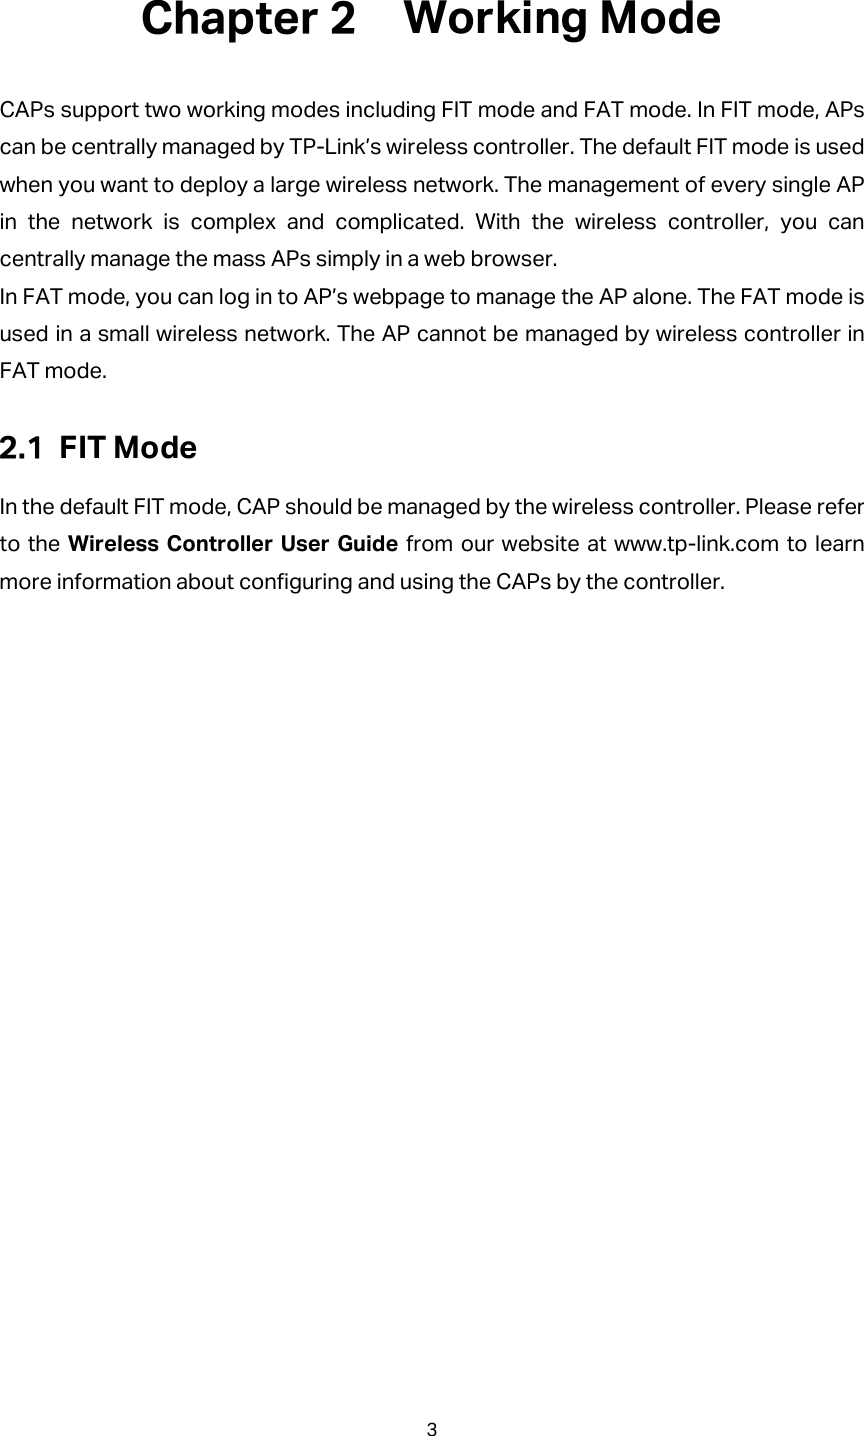  Working Mode CAPs support two working modes including FIT mode and FAT mode. In FIT mode, APs can be centrally managed by TP-Link’s wireless controller. The default FIT mode is used when you want to deploy a large wireless network. The management of every single AP in the network is complex and complicated. With the wireless controller, you can centrally manage the mass APs simply in a web browser. In FAT mode, you can log in to AP’s webpage to manage the AP alone. The FAT mode is used in a small wireless network. The AP cannot be managed by wireless controller in FAT mode.  FIT Mode In the default FIT mode, CAP should be managed by the wireless controller. Please refer to the Wireless Controller User Guide from our website at www.tp-link.com to learn more information about configuring and using the CAPs by the controller. 3  